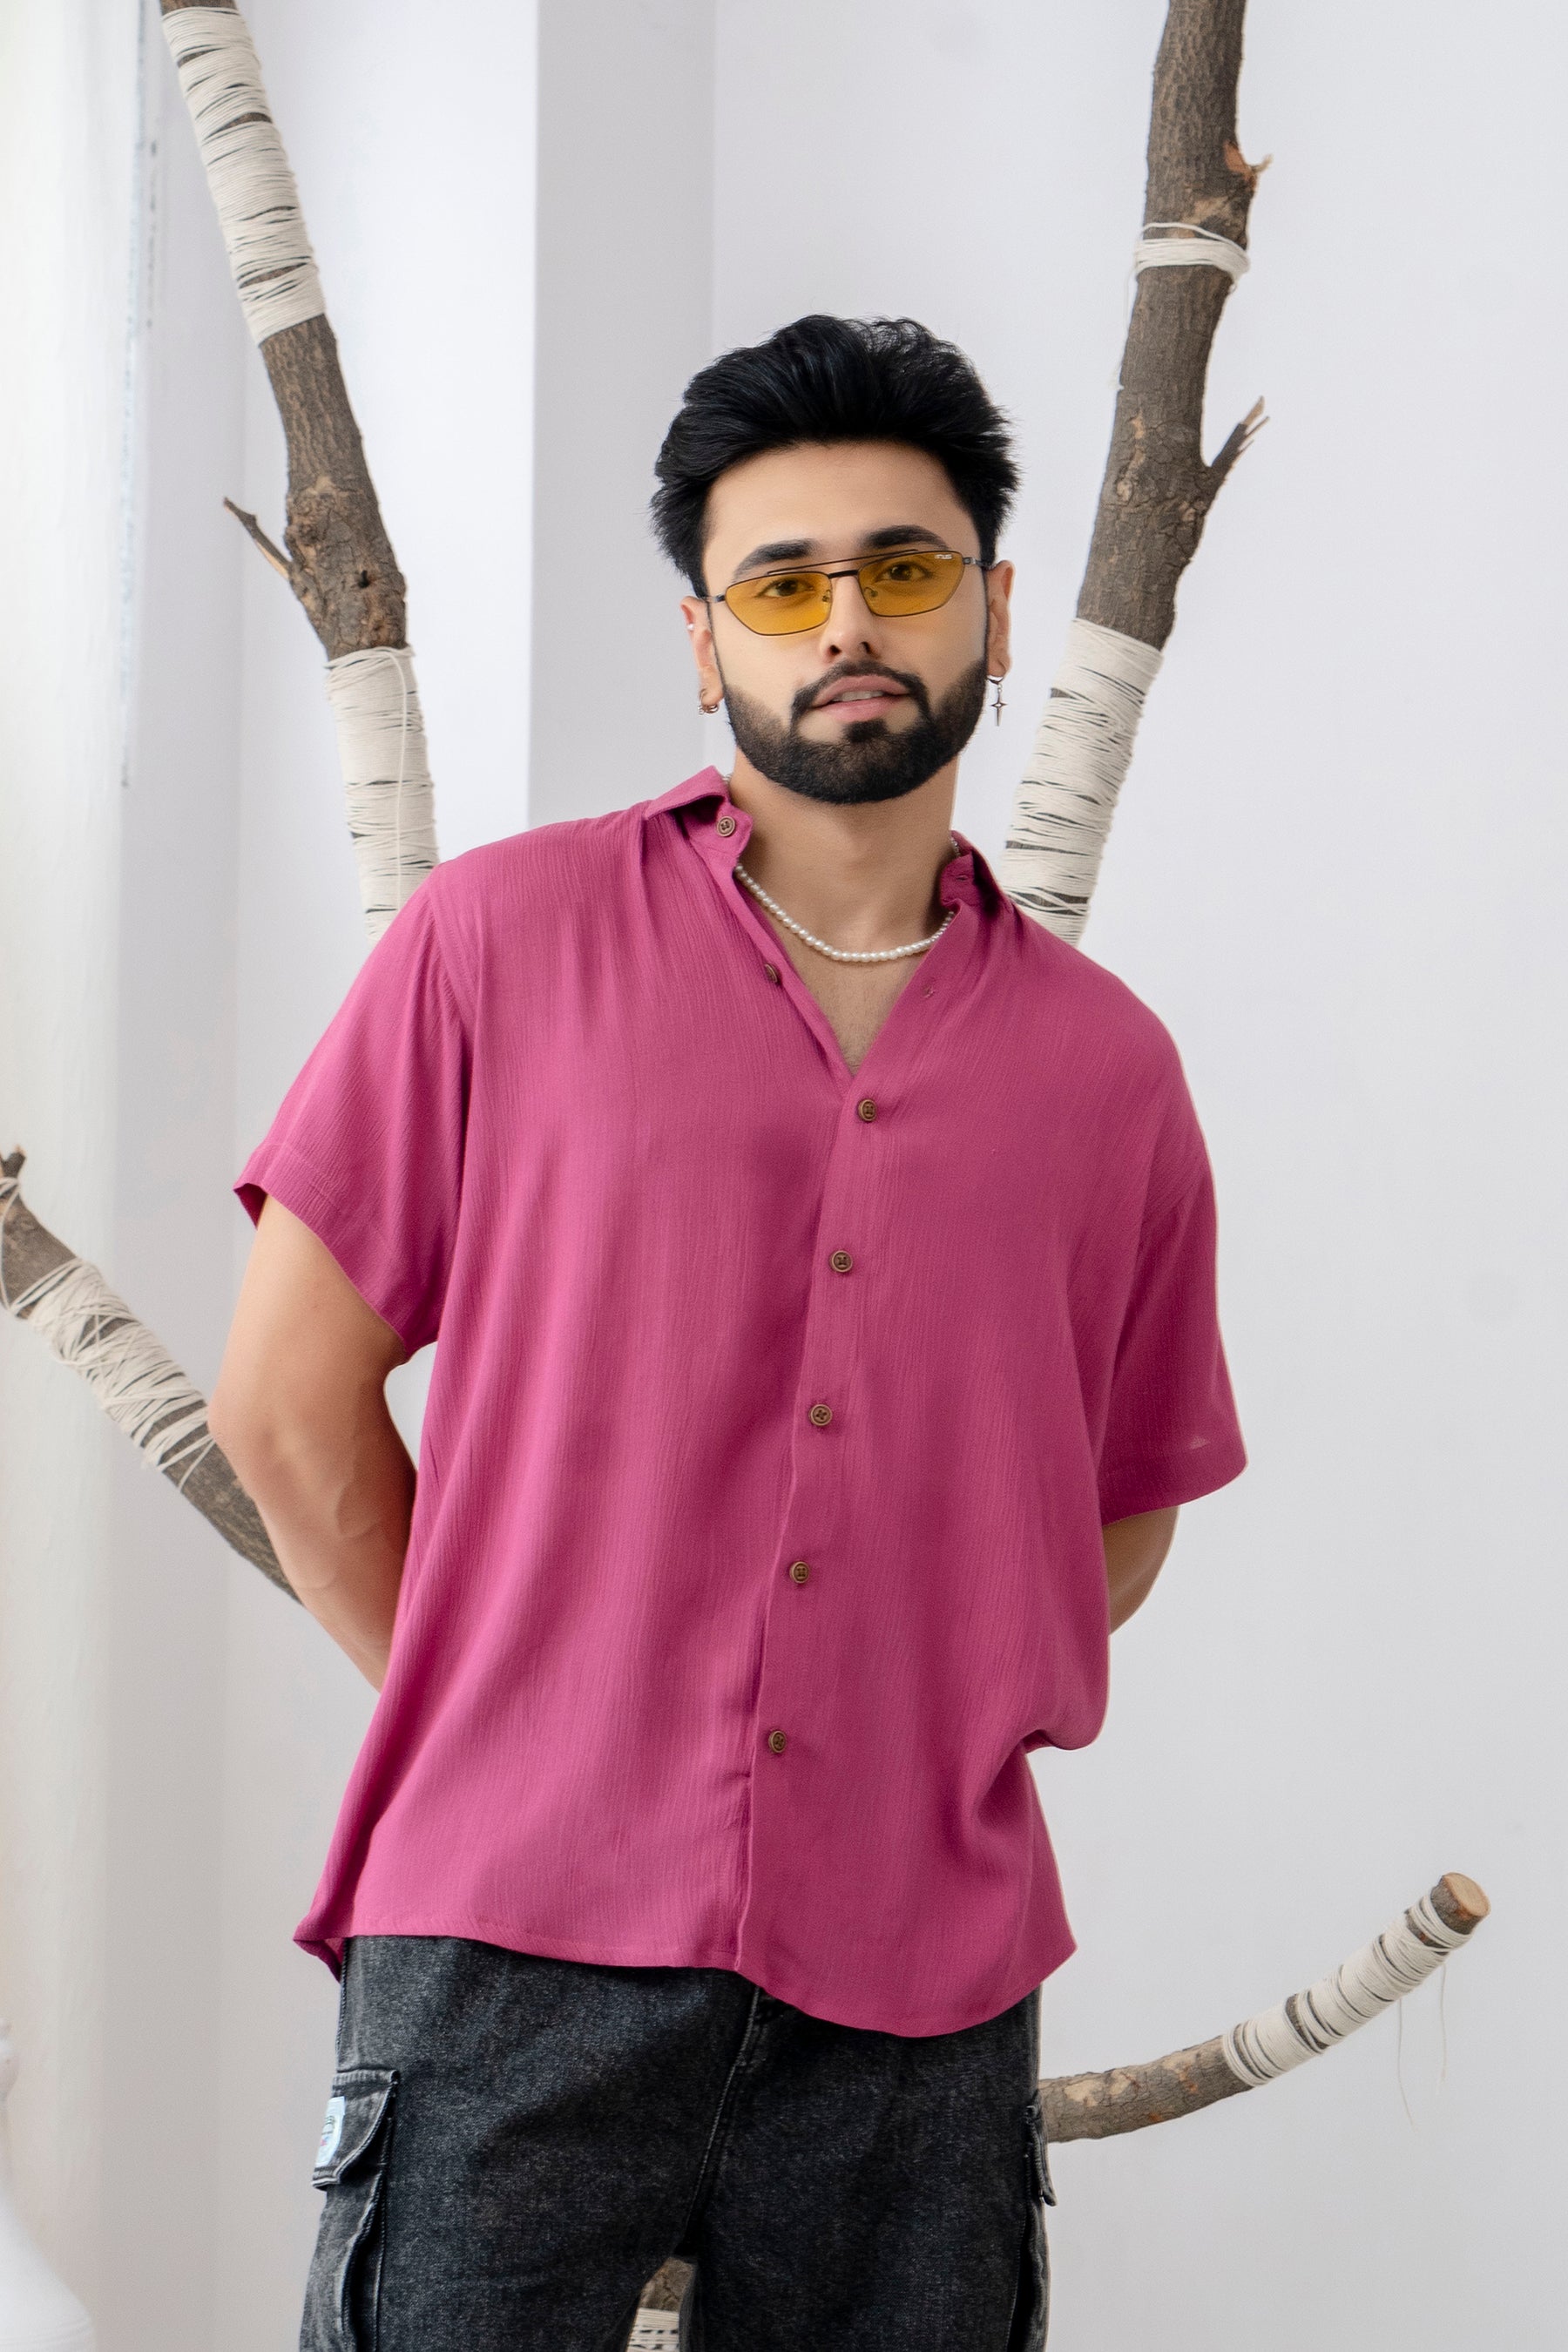 Firangi Yarn Relaxed Fit Solid Super Flowy Re-engineered Cotton- Half Sleeves Party Shirt Cranberry Pink